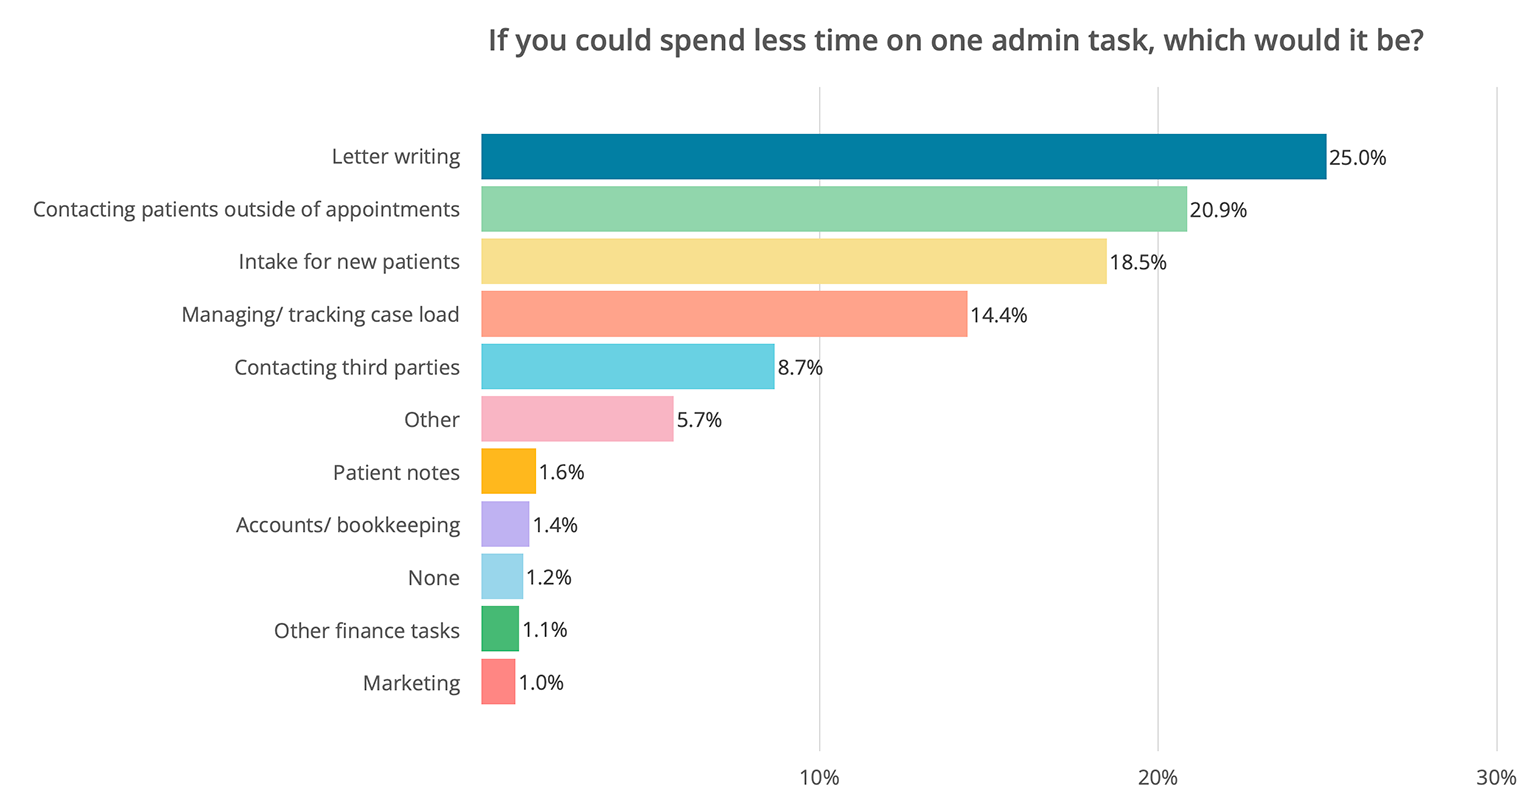 Bar chart of admin tasks allied health professionals would like to spend less time on